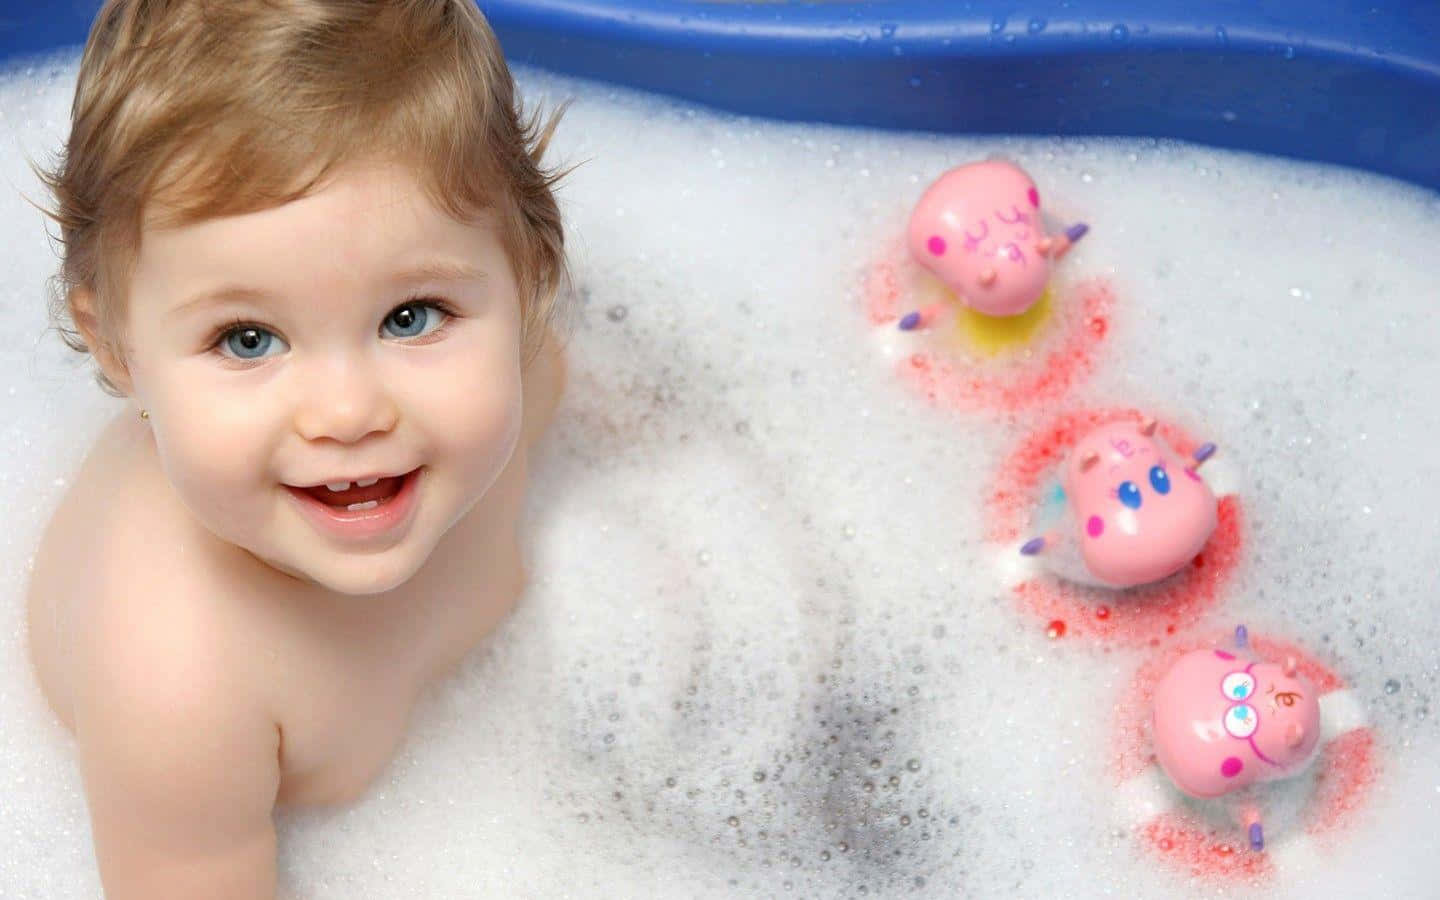 A Baby Is Playing With Bubbles In A Bath Tub